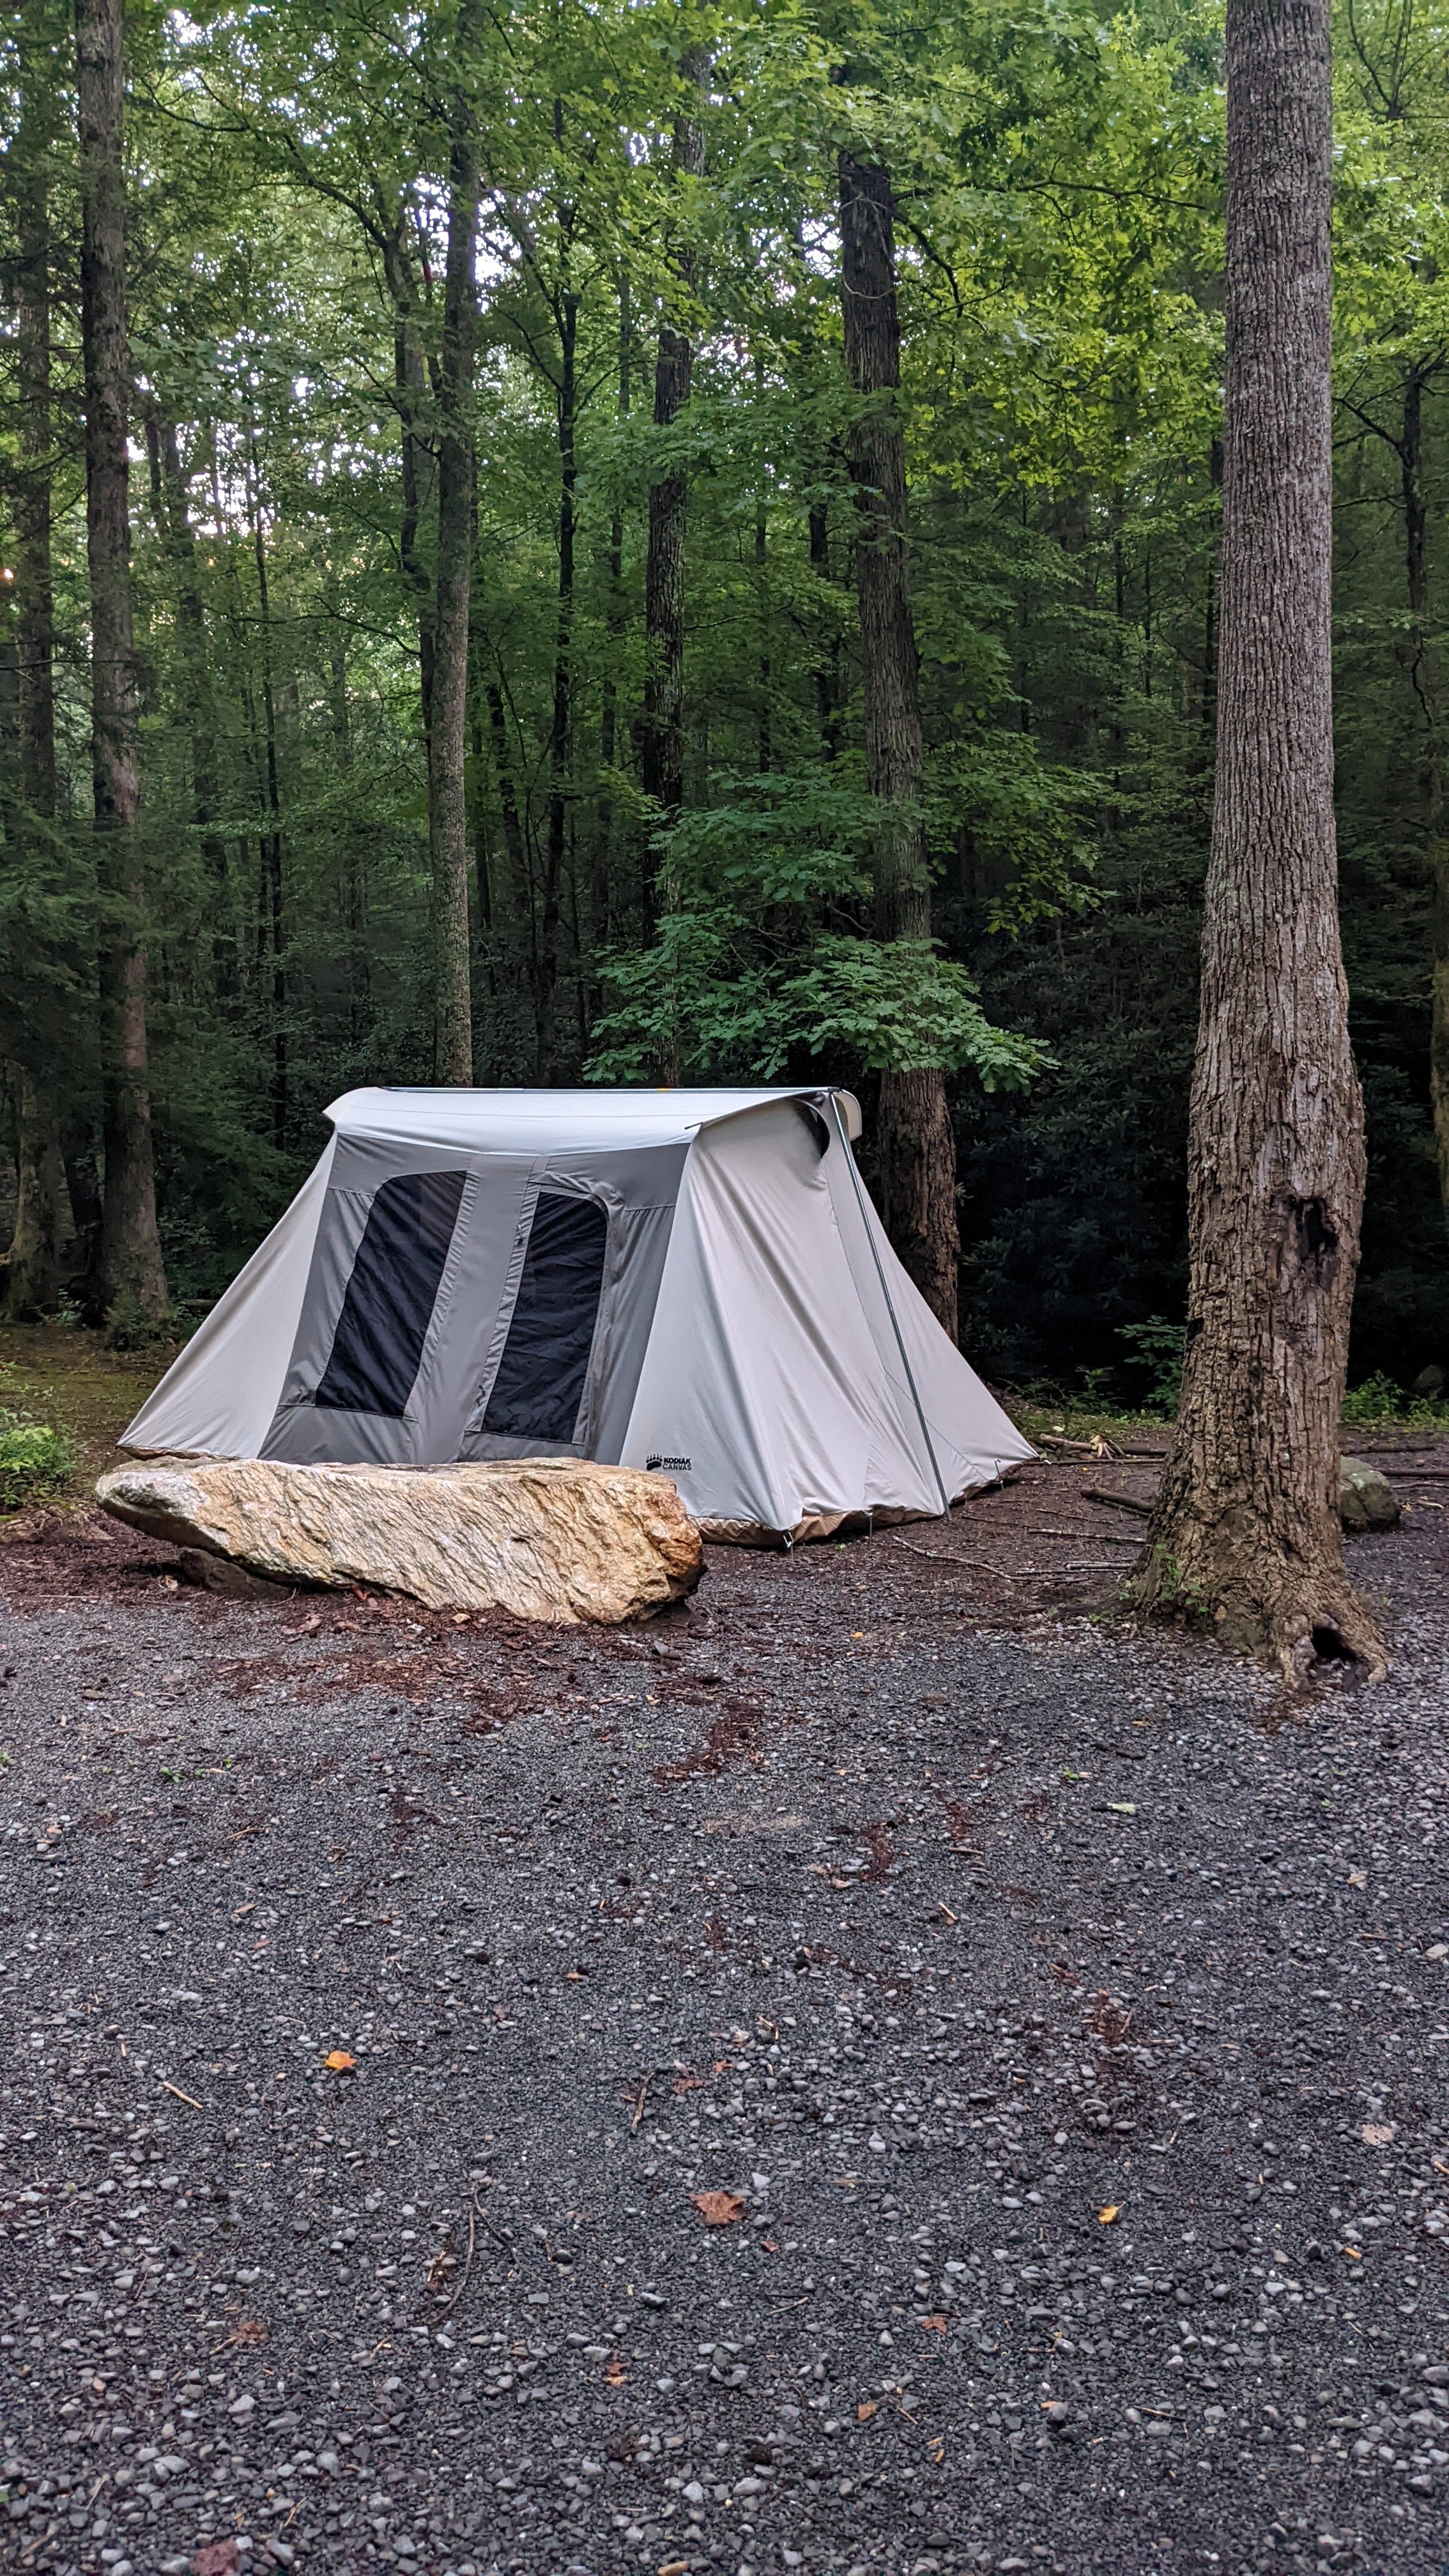 Camper submitted image from Hickey Gap (Cohutta WMA) - 4